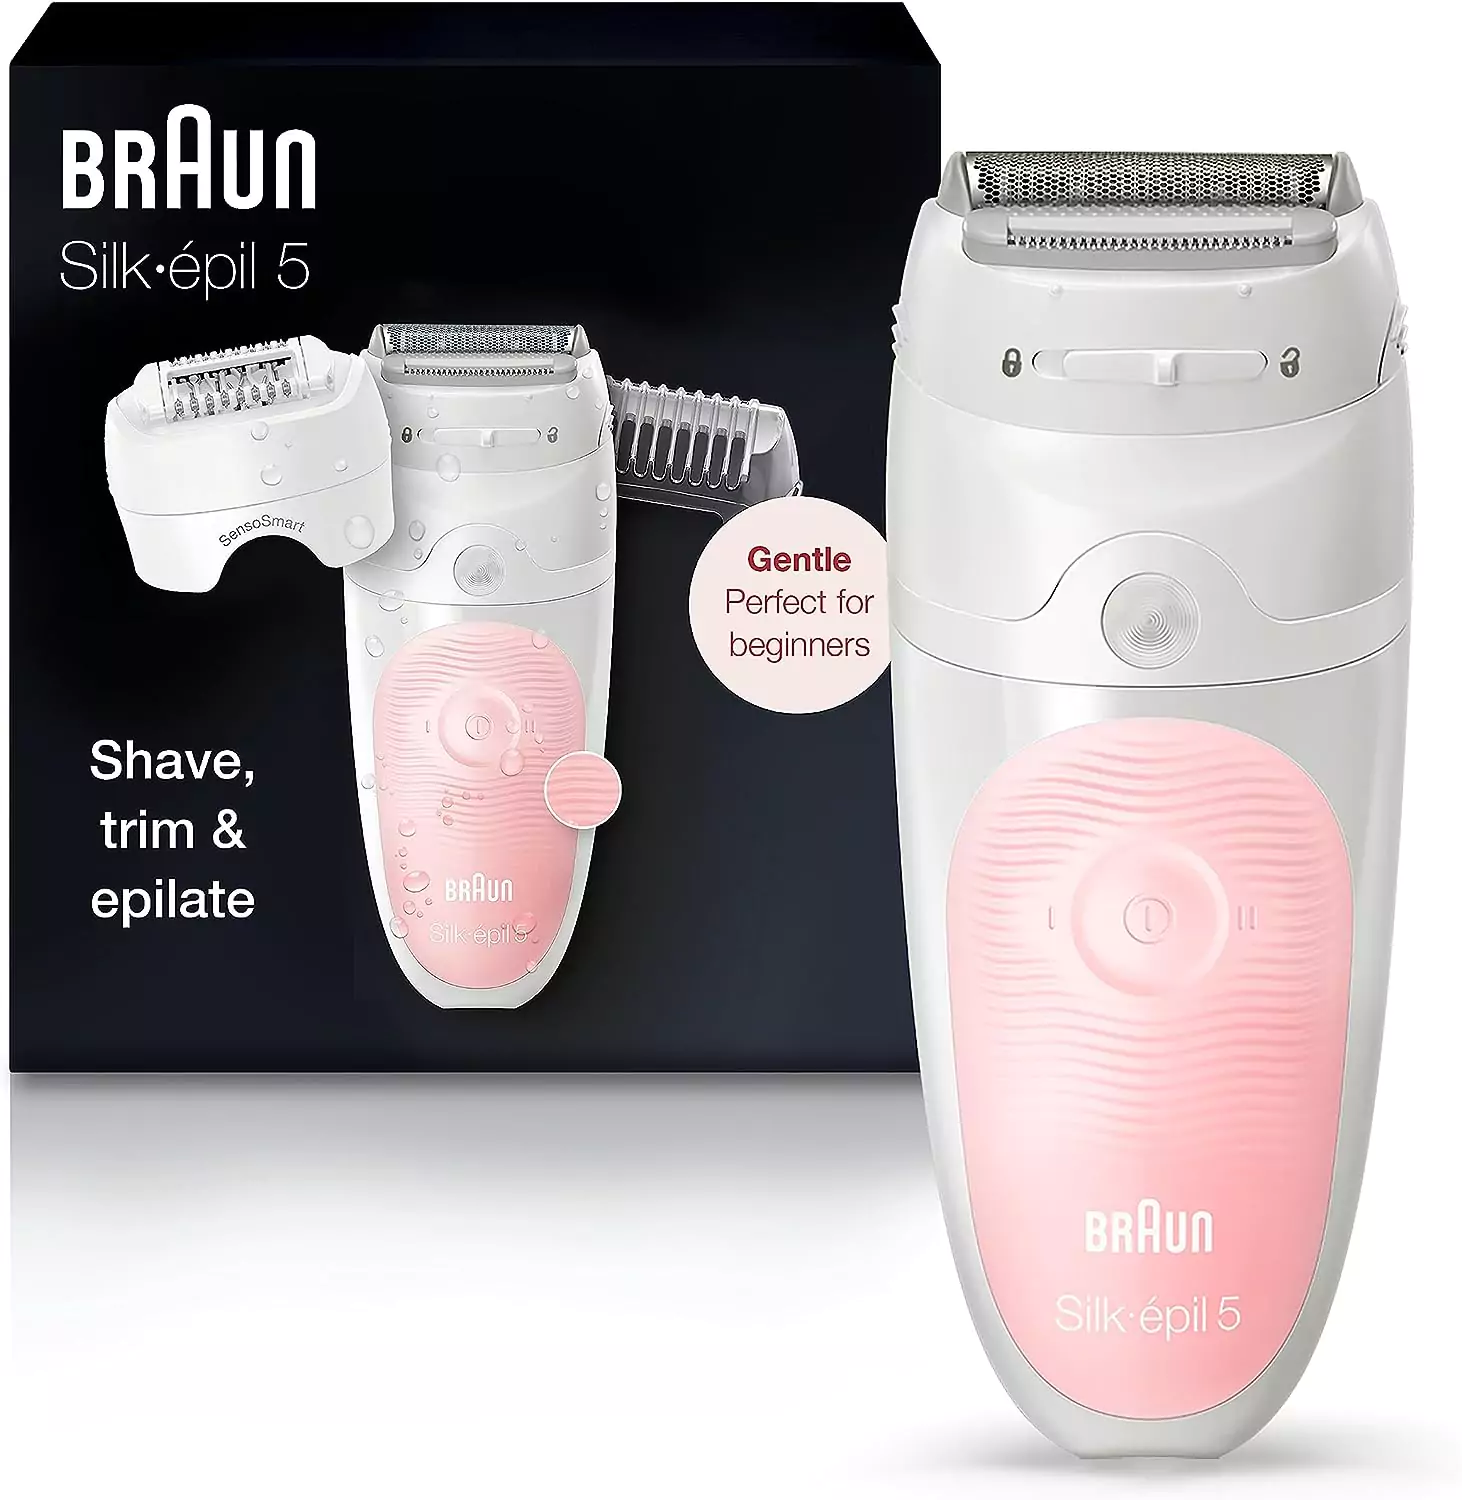 Braun Epilator for Women, Silk-epil 5, Wet and Dry, Shaver and Trimmer, Cordless, Rechargeable, SES 5-620 White/Pink